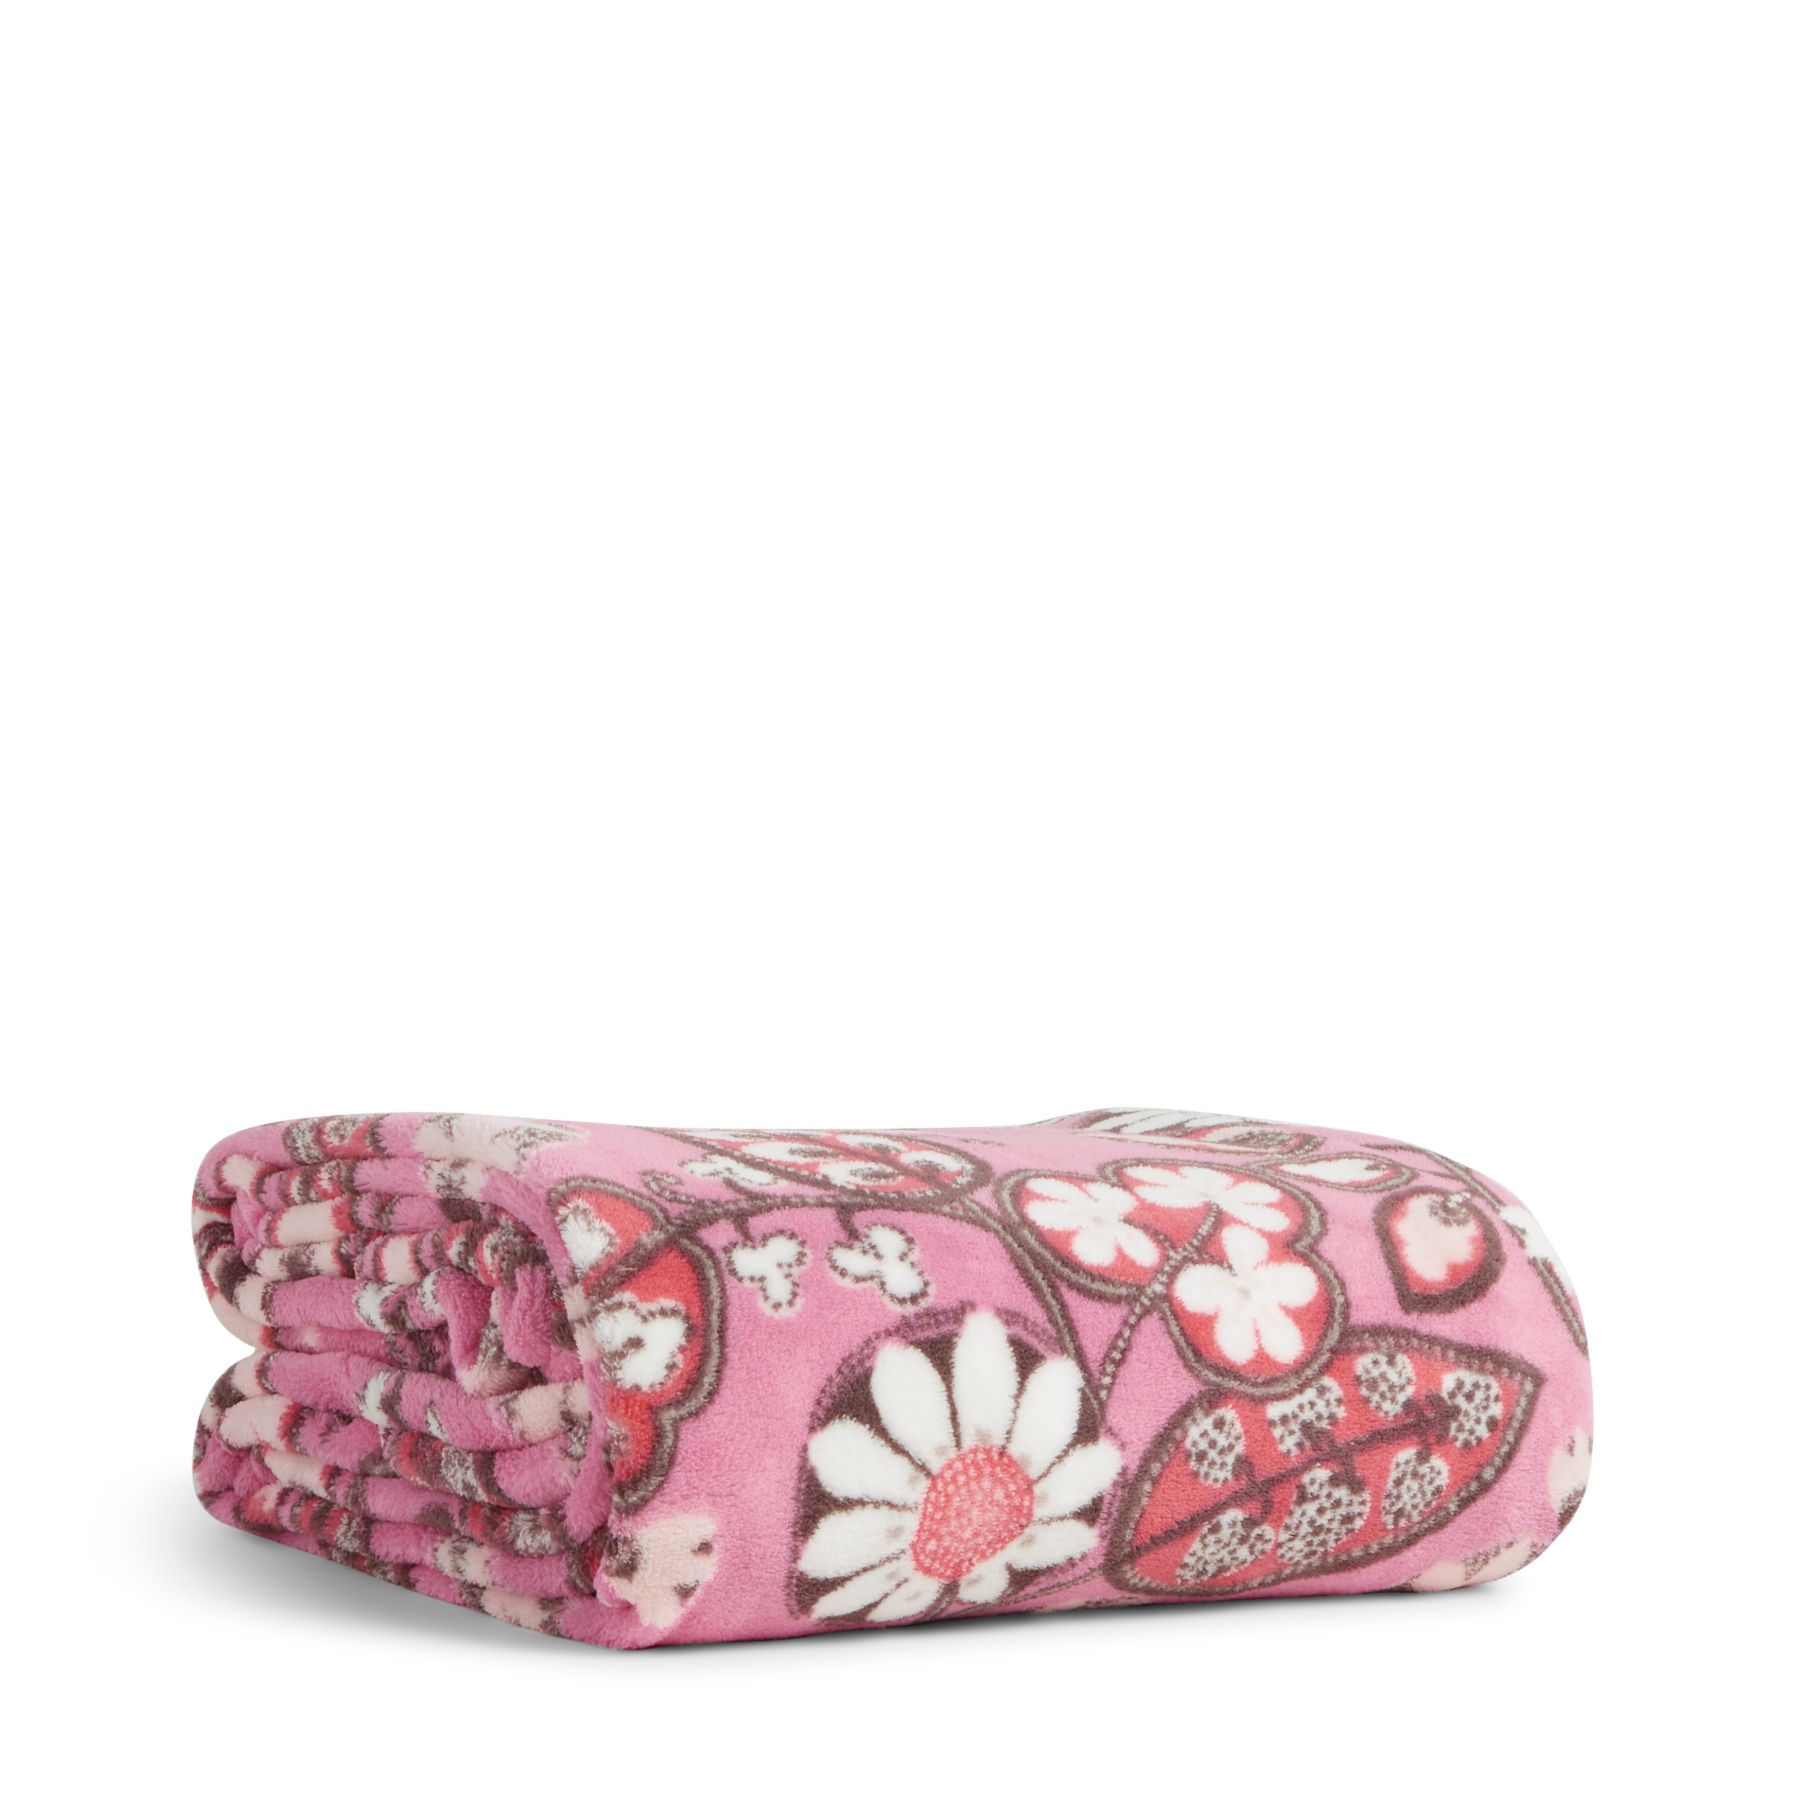 Holiday SALE 50% OFF SELECT PATTERNS at Vera Bradley 